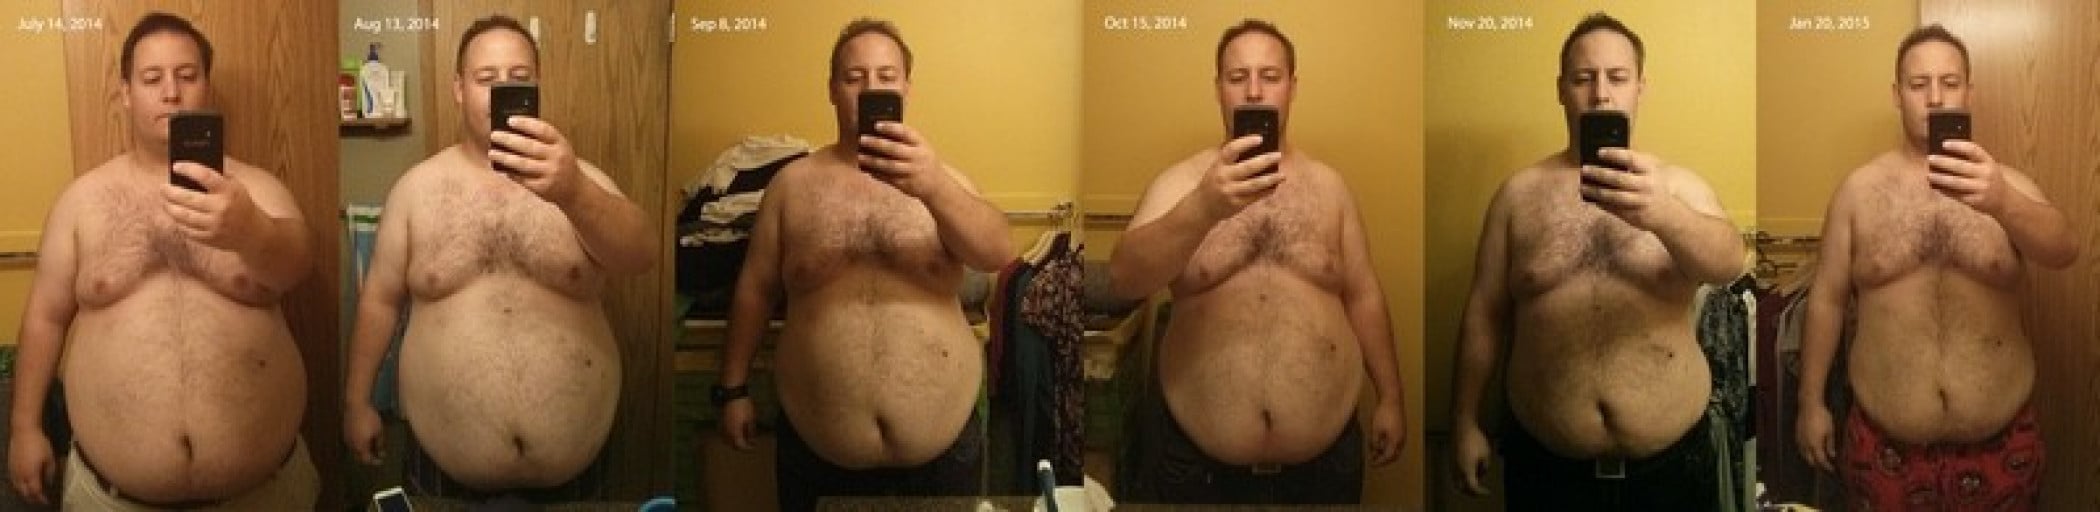 A photo of a 5'9" man showing a weight cut from 310 pounds to 250 pounds. A respectable loss of 60 pounds.